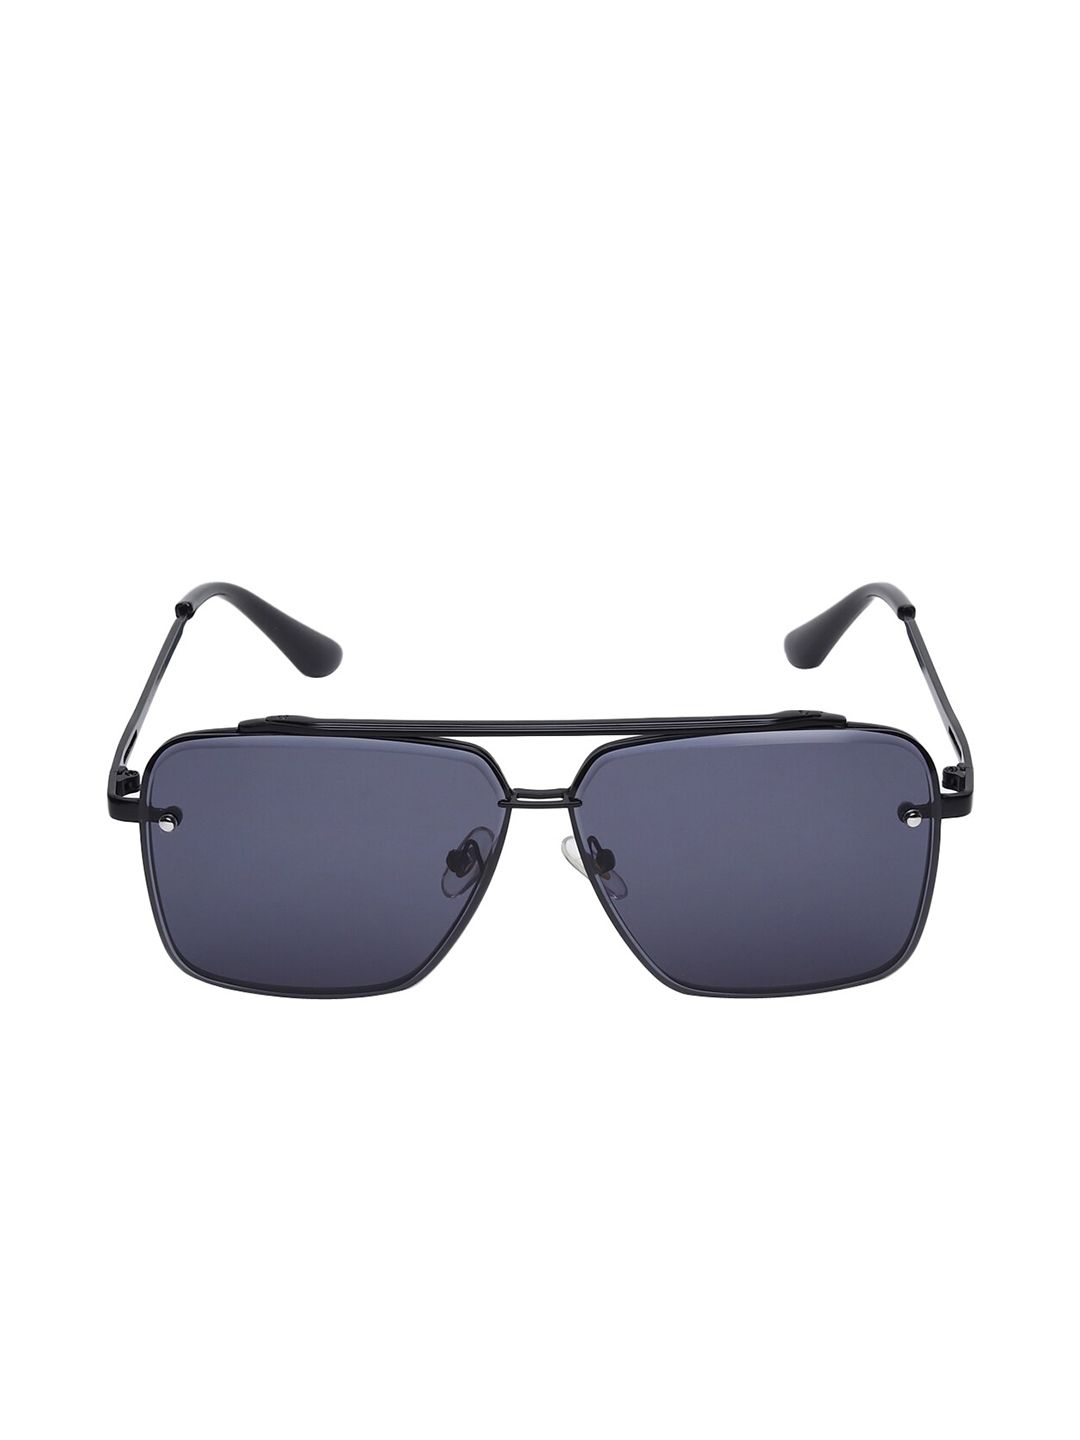 CRIBA Unisex Black Lens & Black Browline Sunglasses with UV Protected Lens Price in India